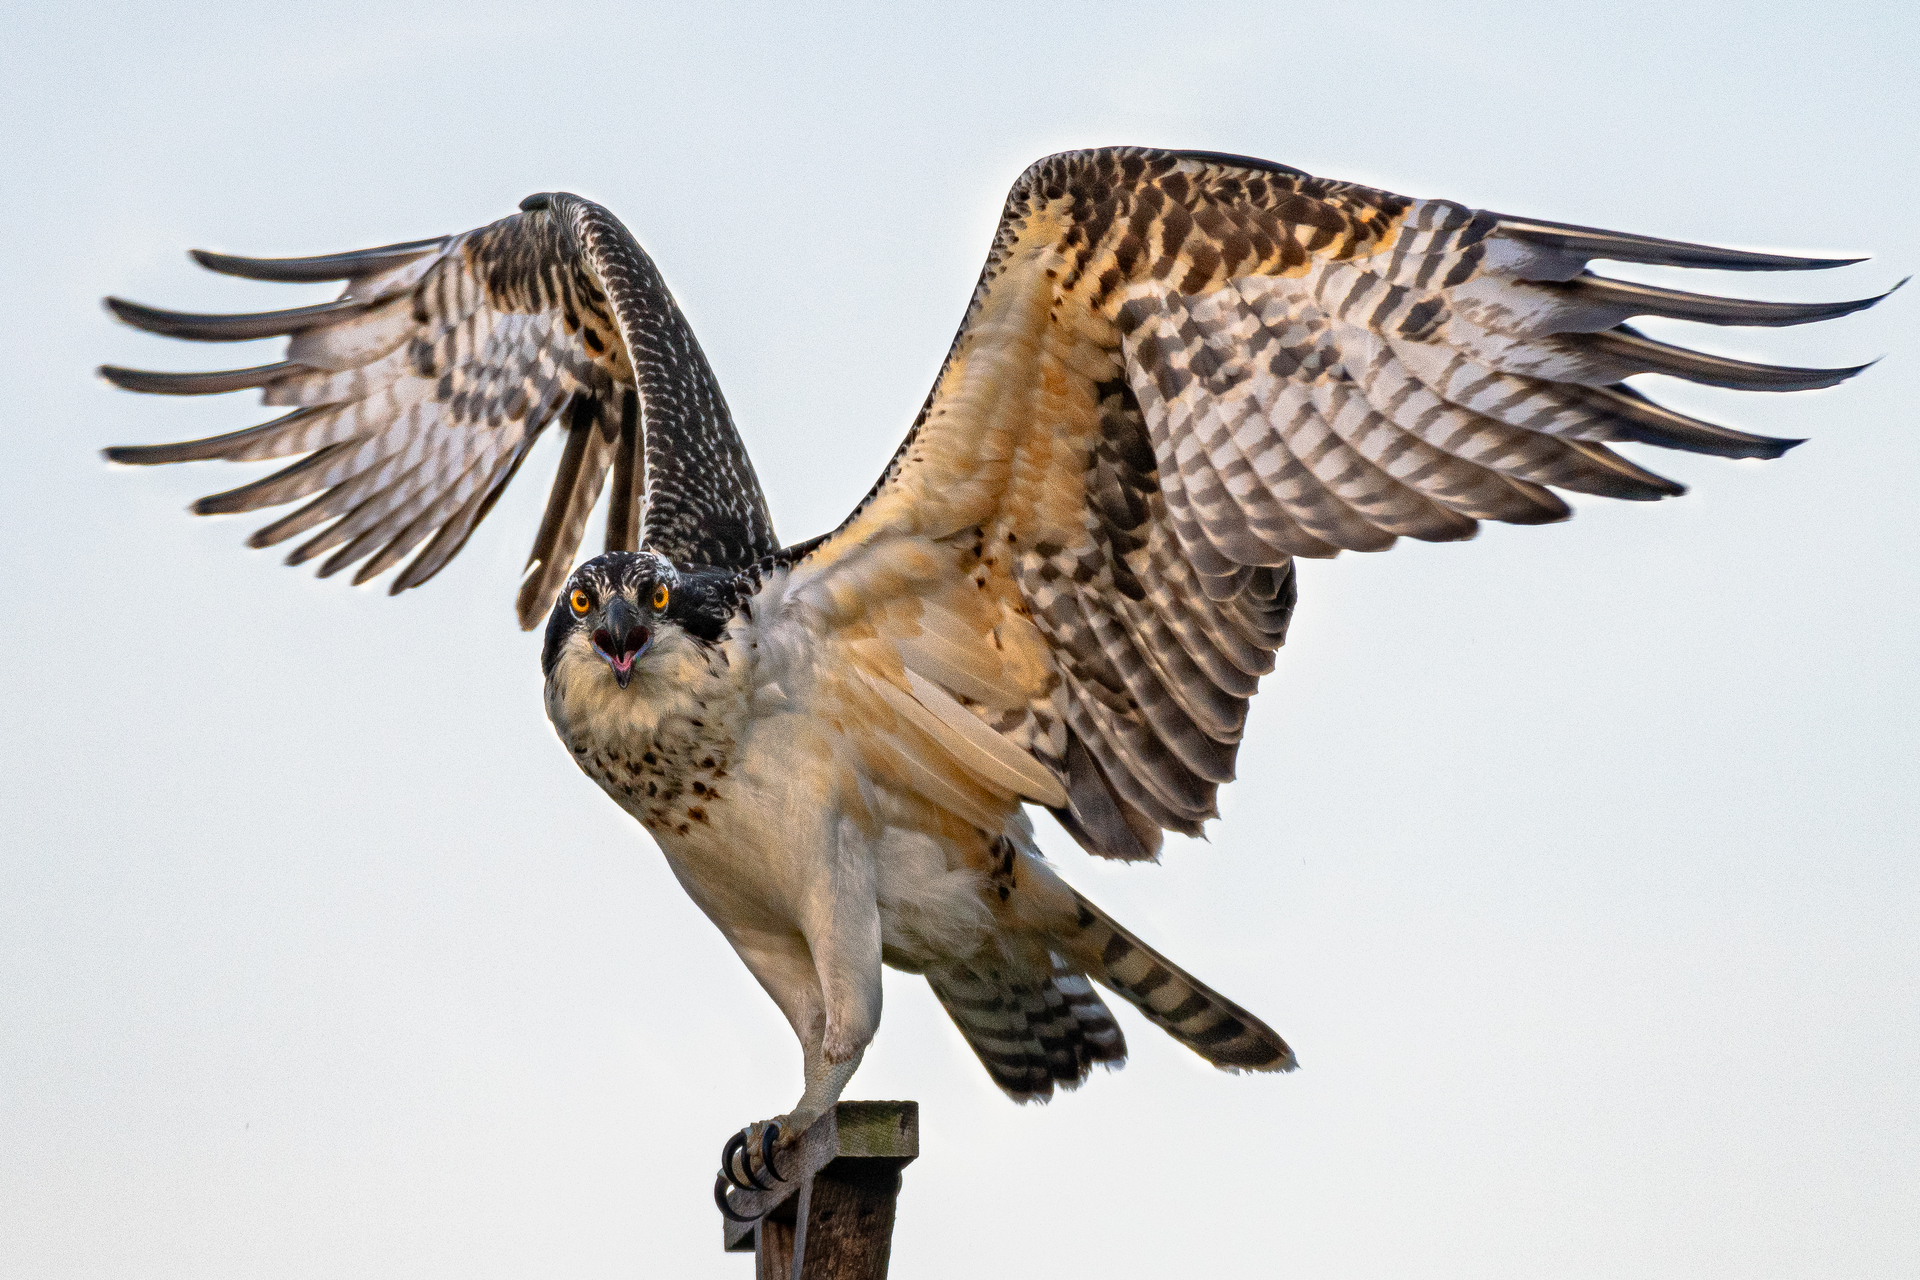 Osprey perched on ledge with wings expanded